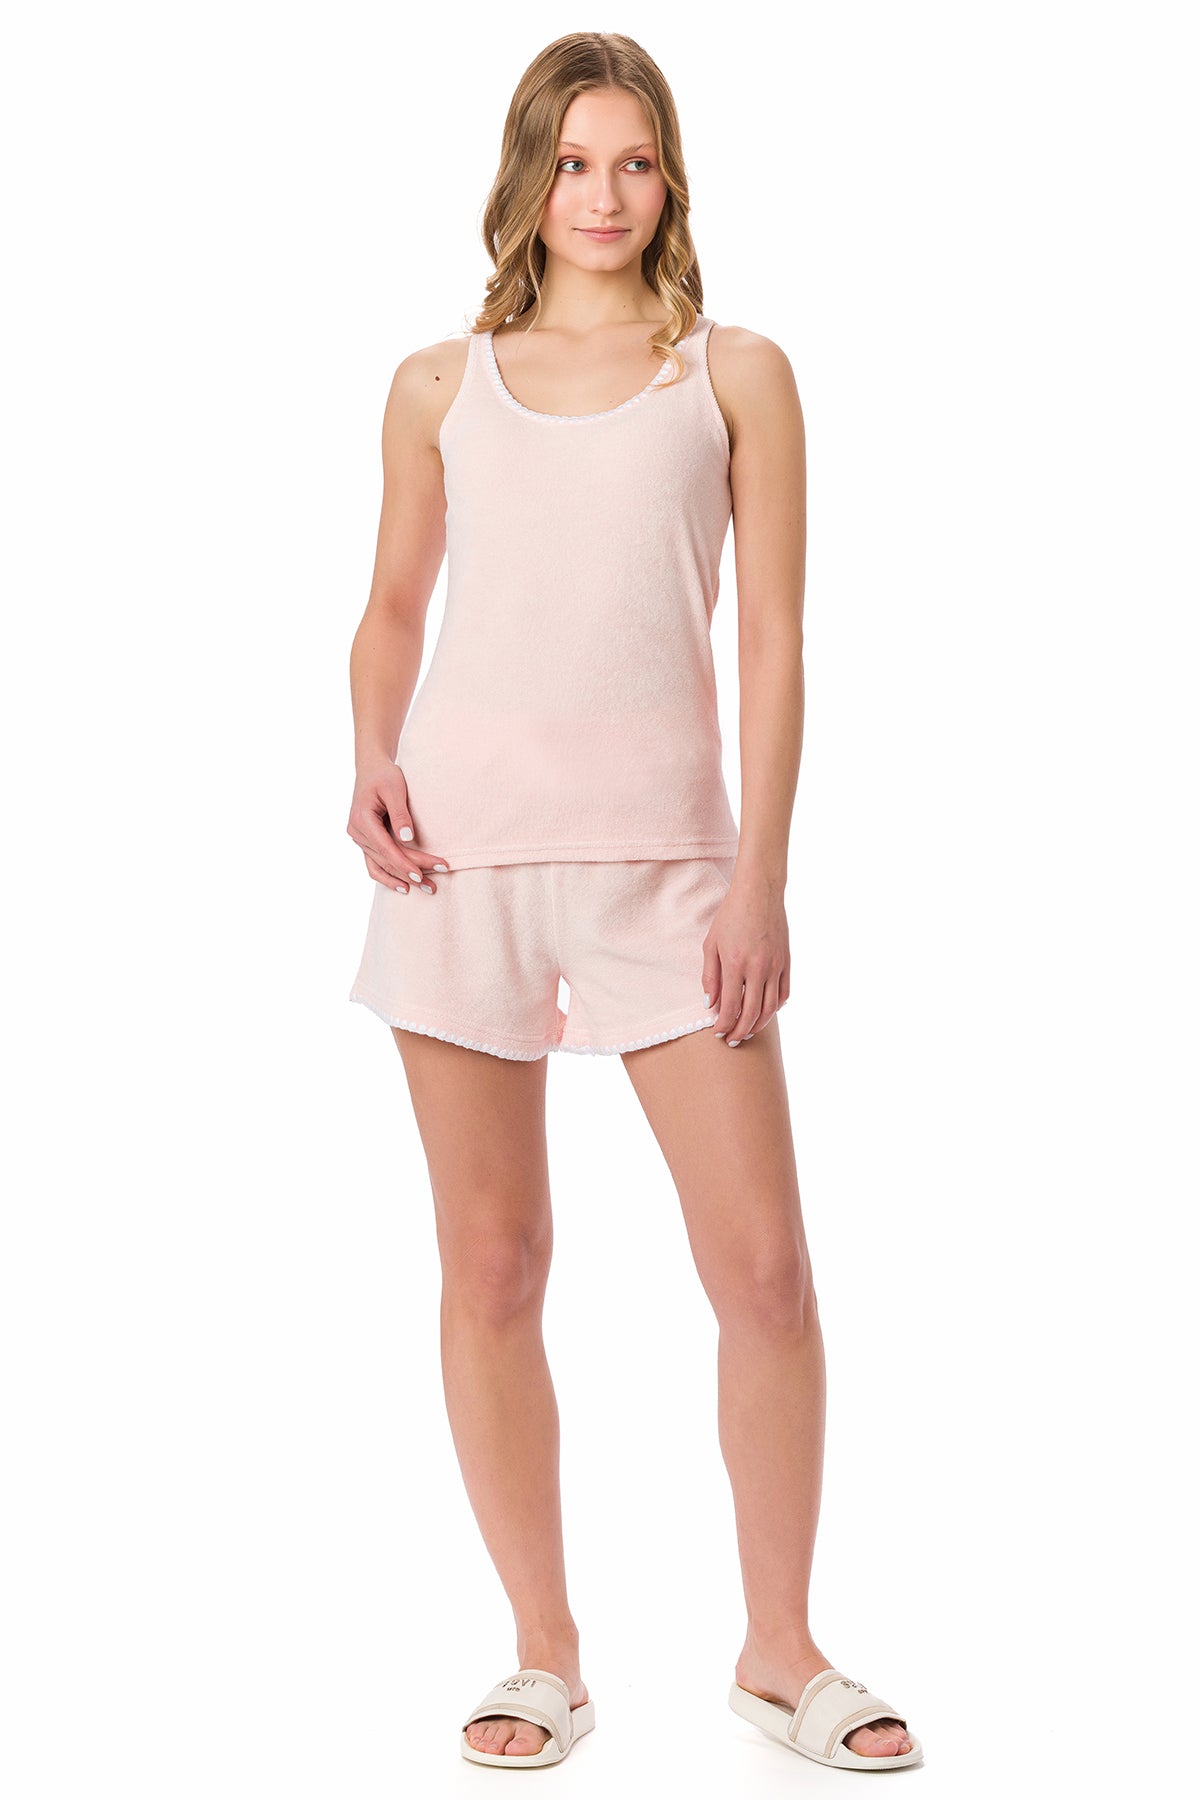 Suvi NYC Women's 2-Set Shorts Turkish Terry cotton Gym. Work Out. Yoga, Fitness or Pajama set.